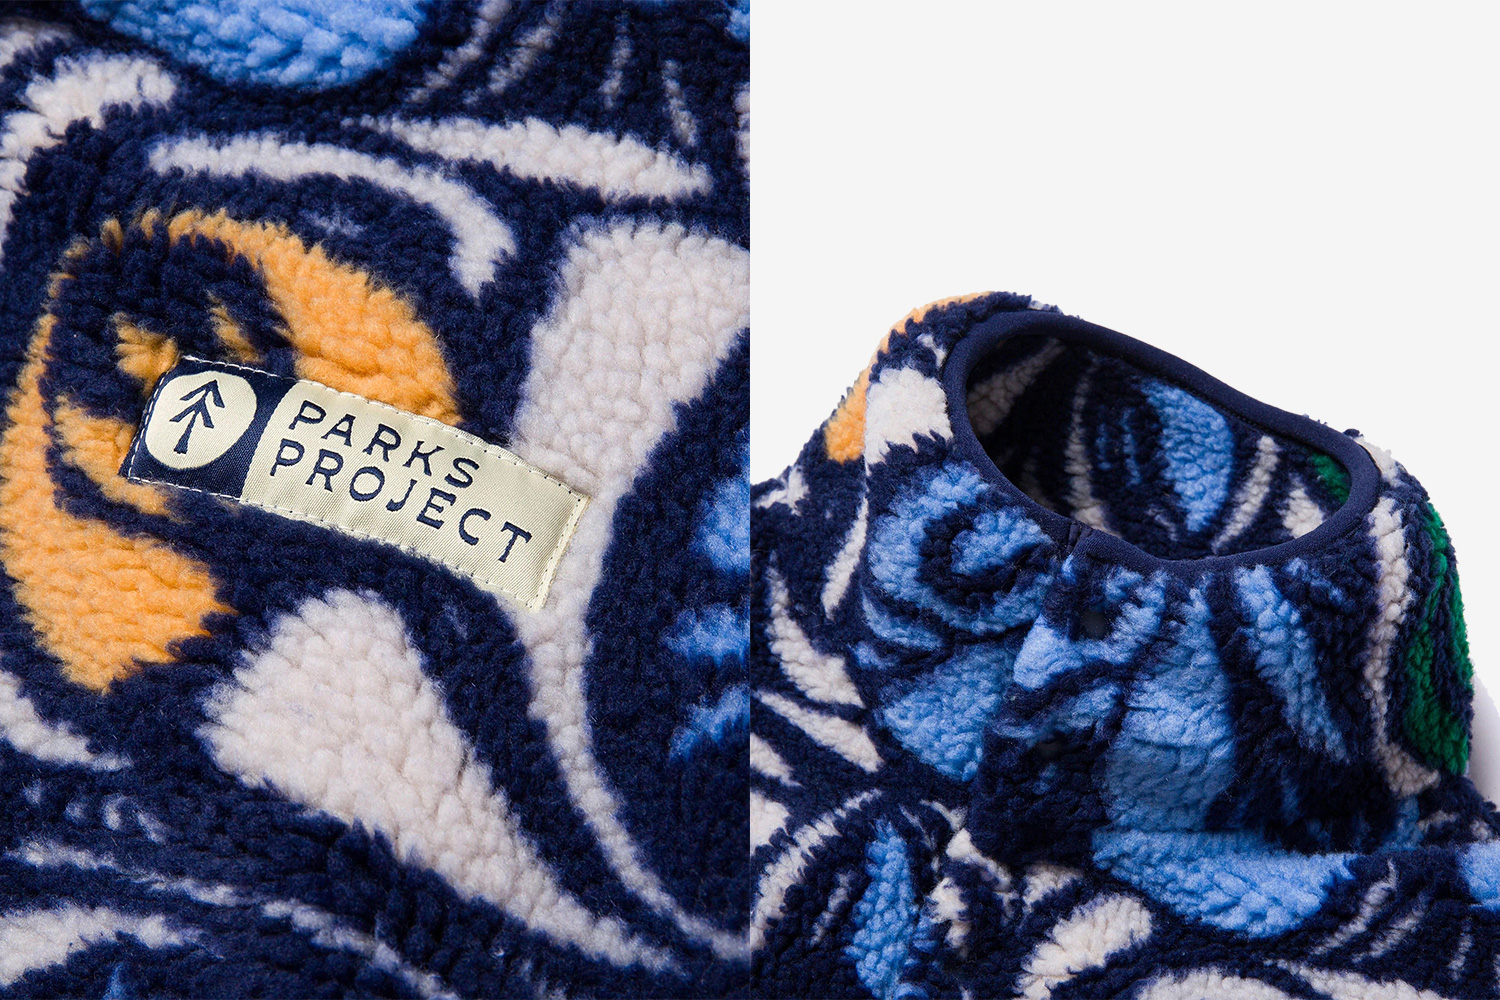 Details of the fleece on a Parks Project pullover